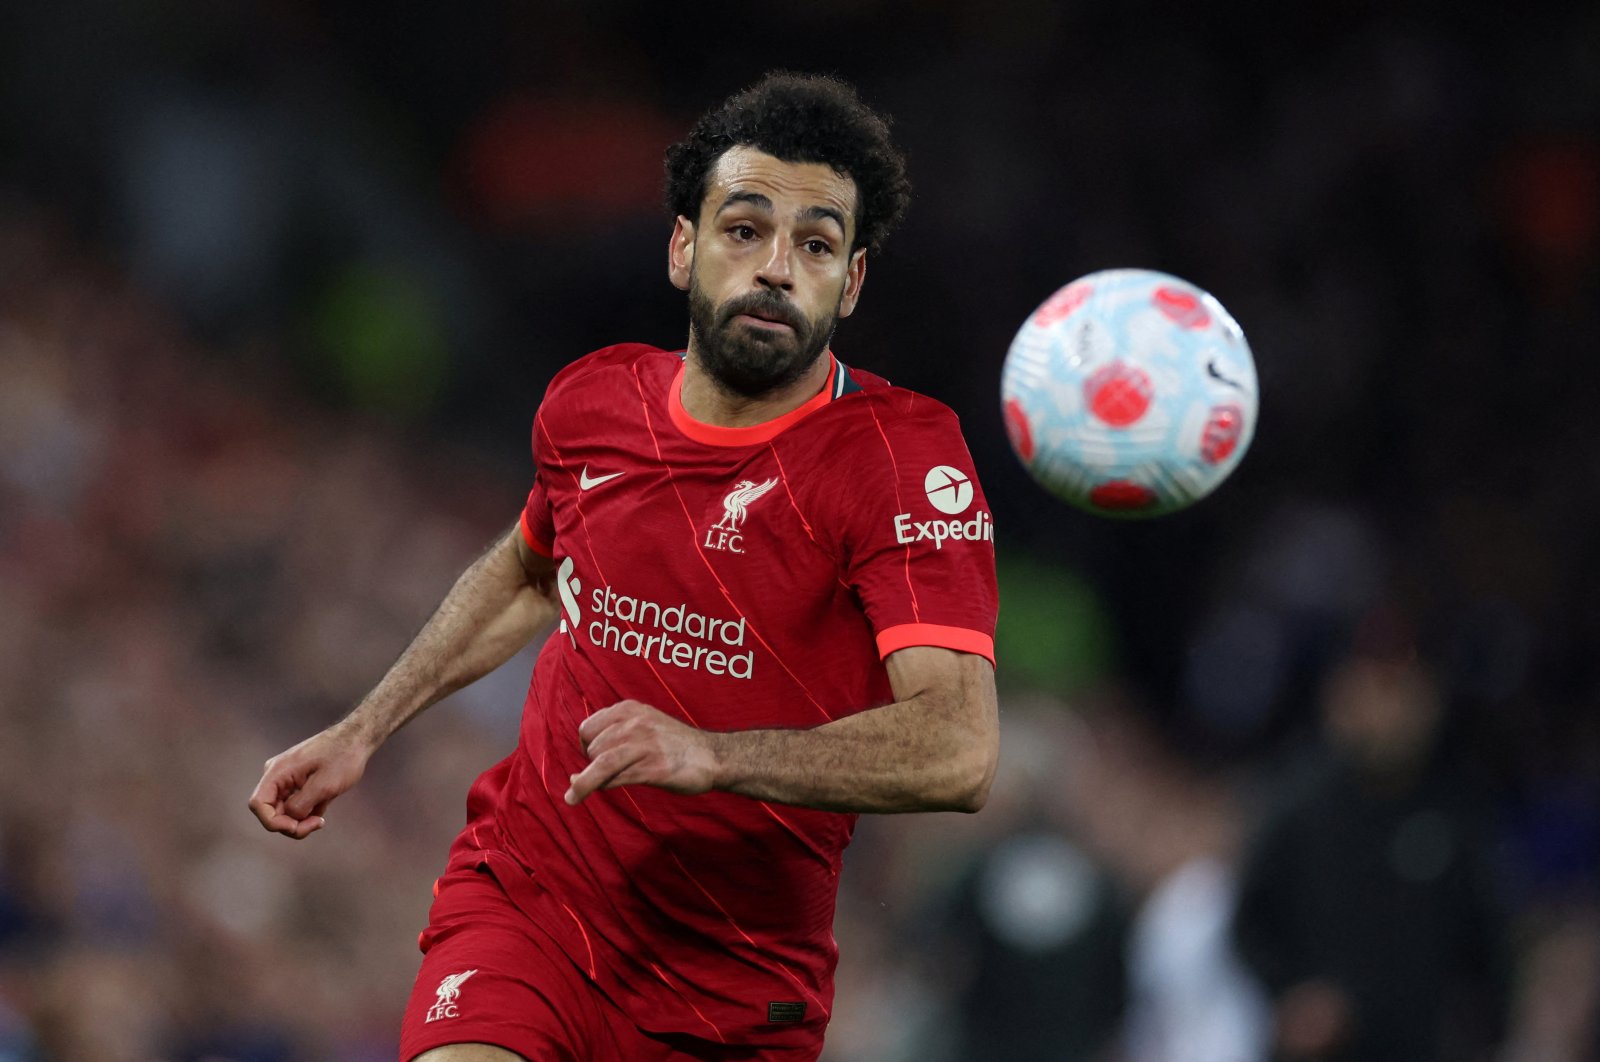 Liverpool&#039;s Mohamed Salah in action during a Premier League match against Tottenham Hotspur, Liverpool, England, May 7, 2022. (Reuters Photo)